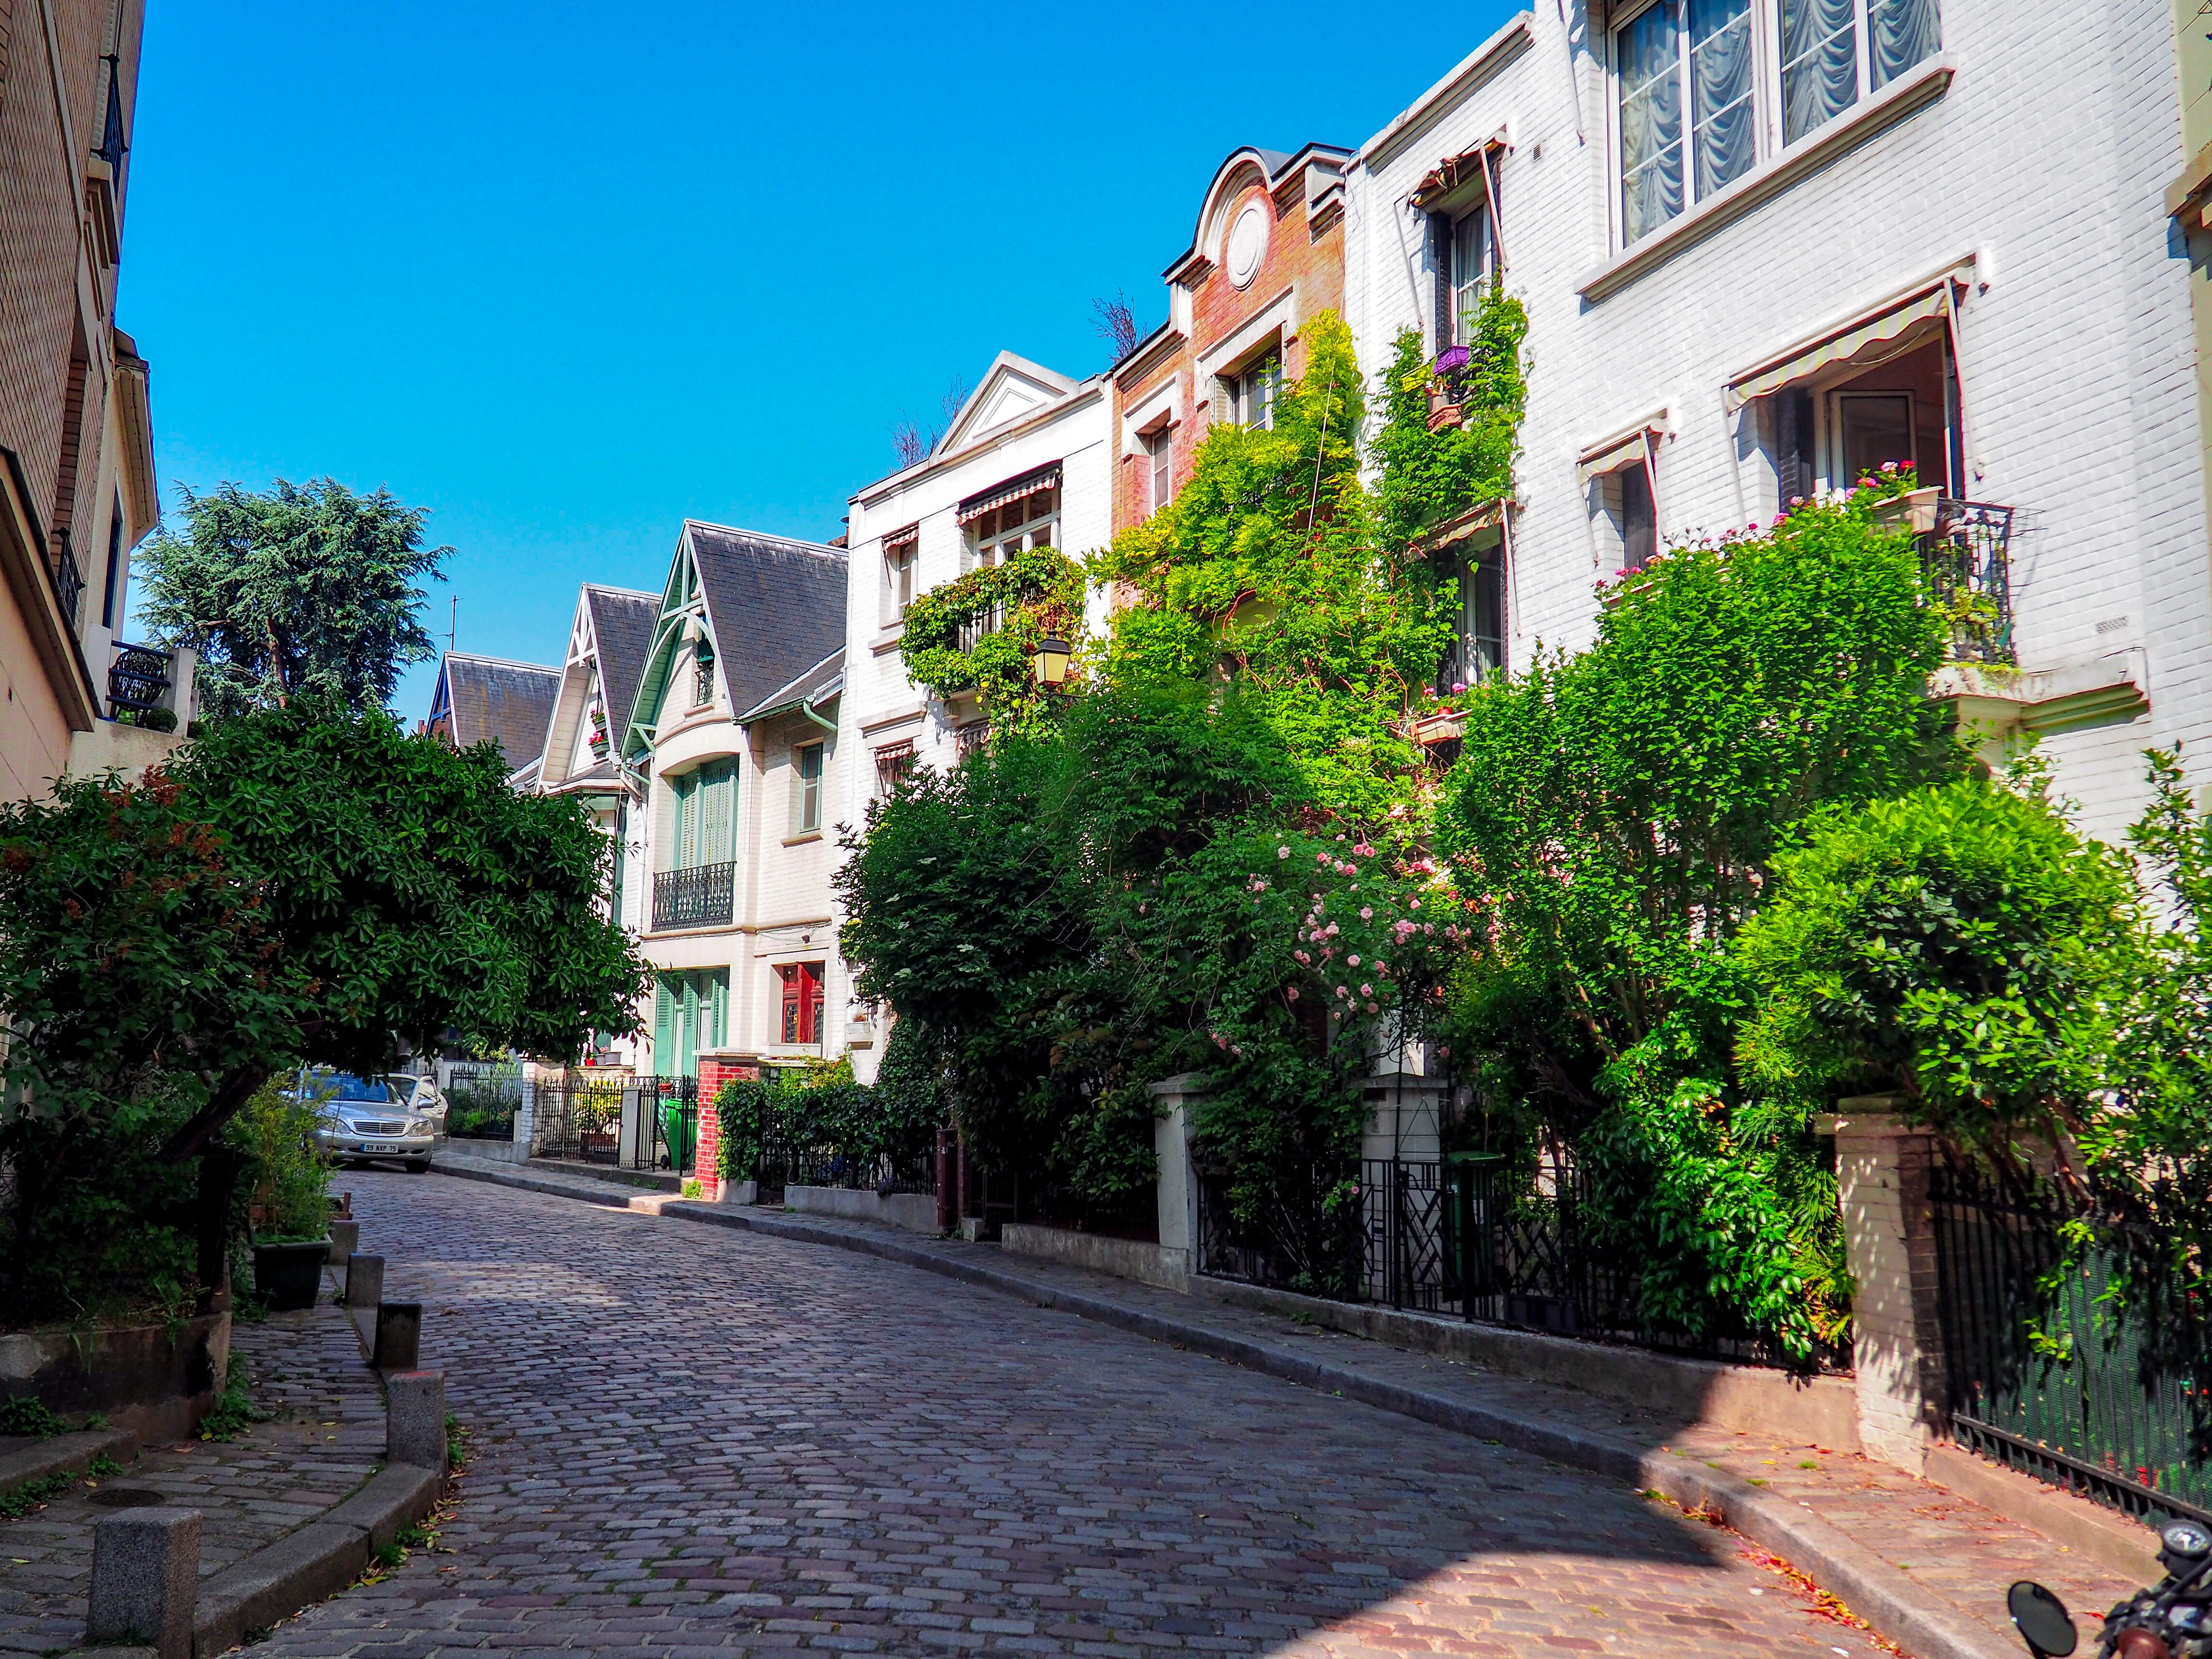 A walk to discover the authentic side of Montmartre | by Marco | Medium